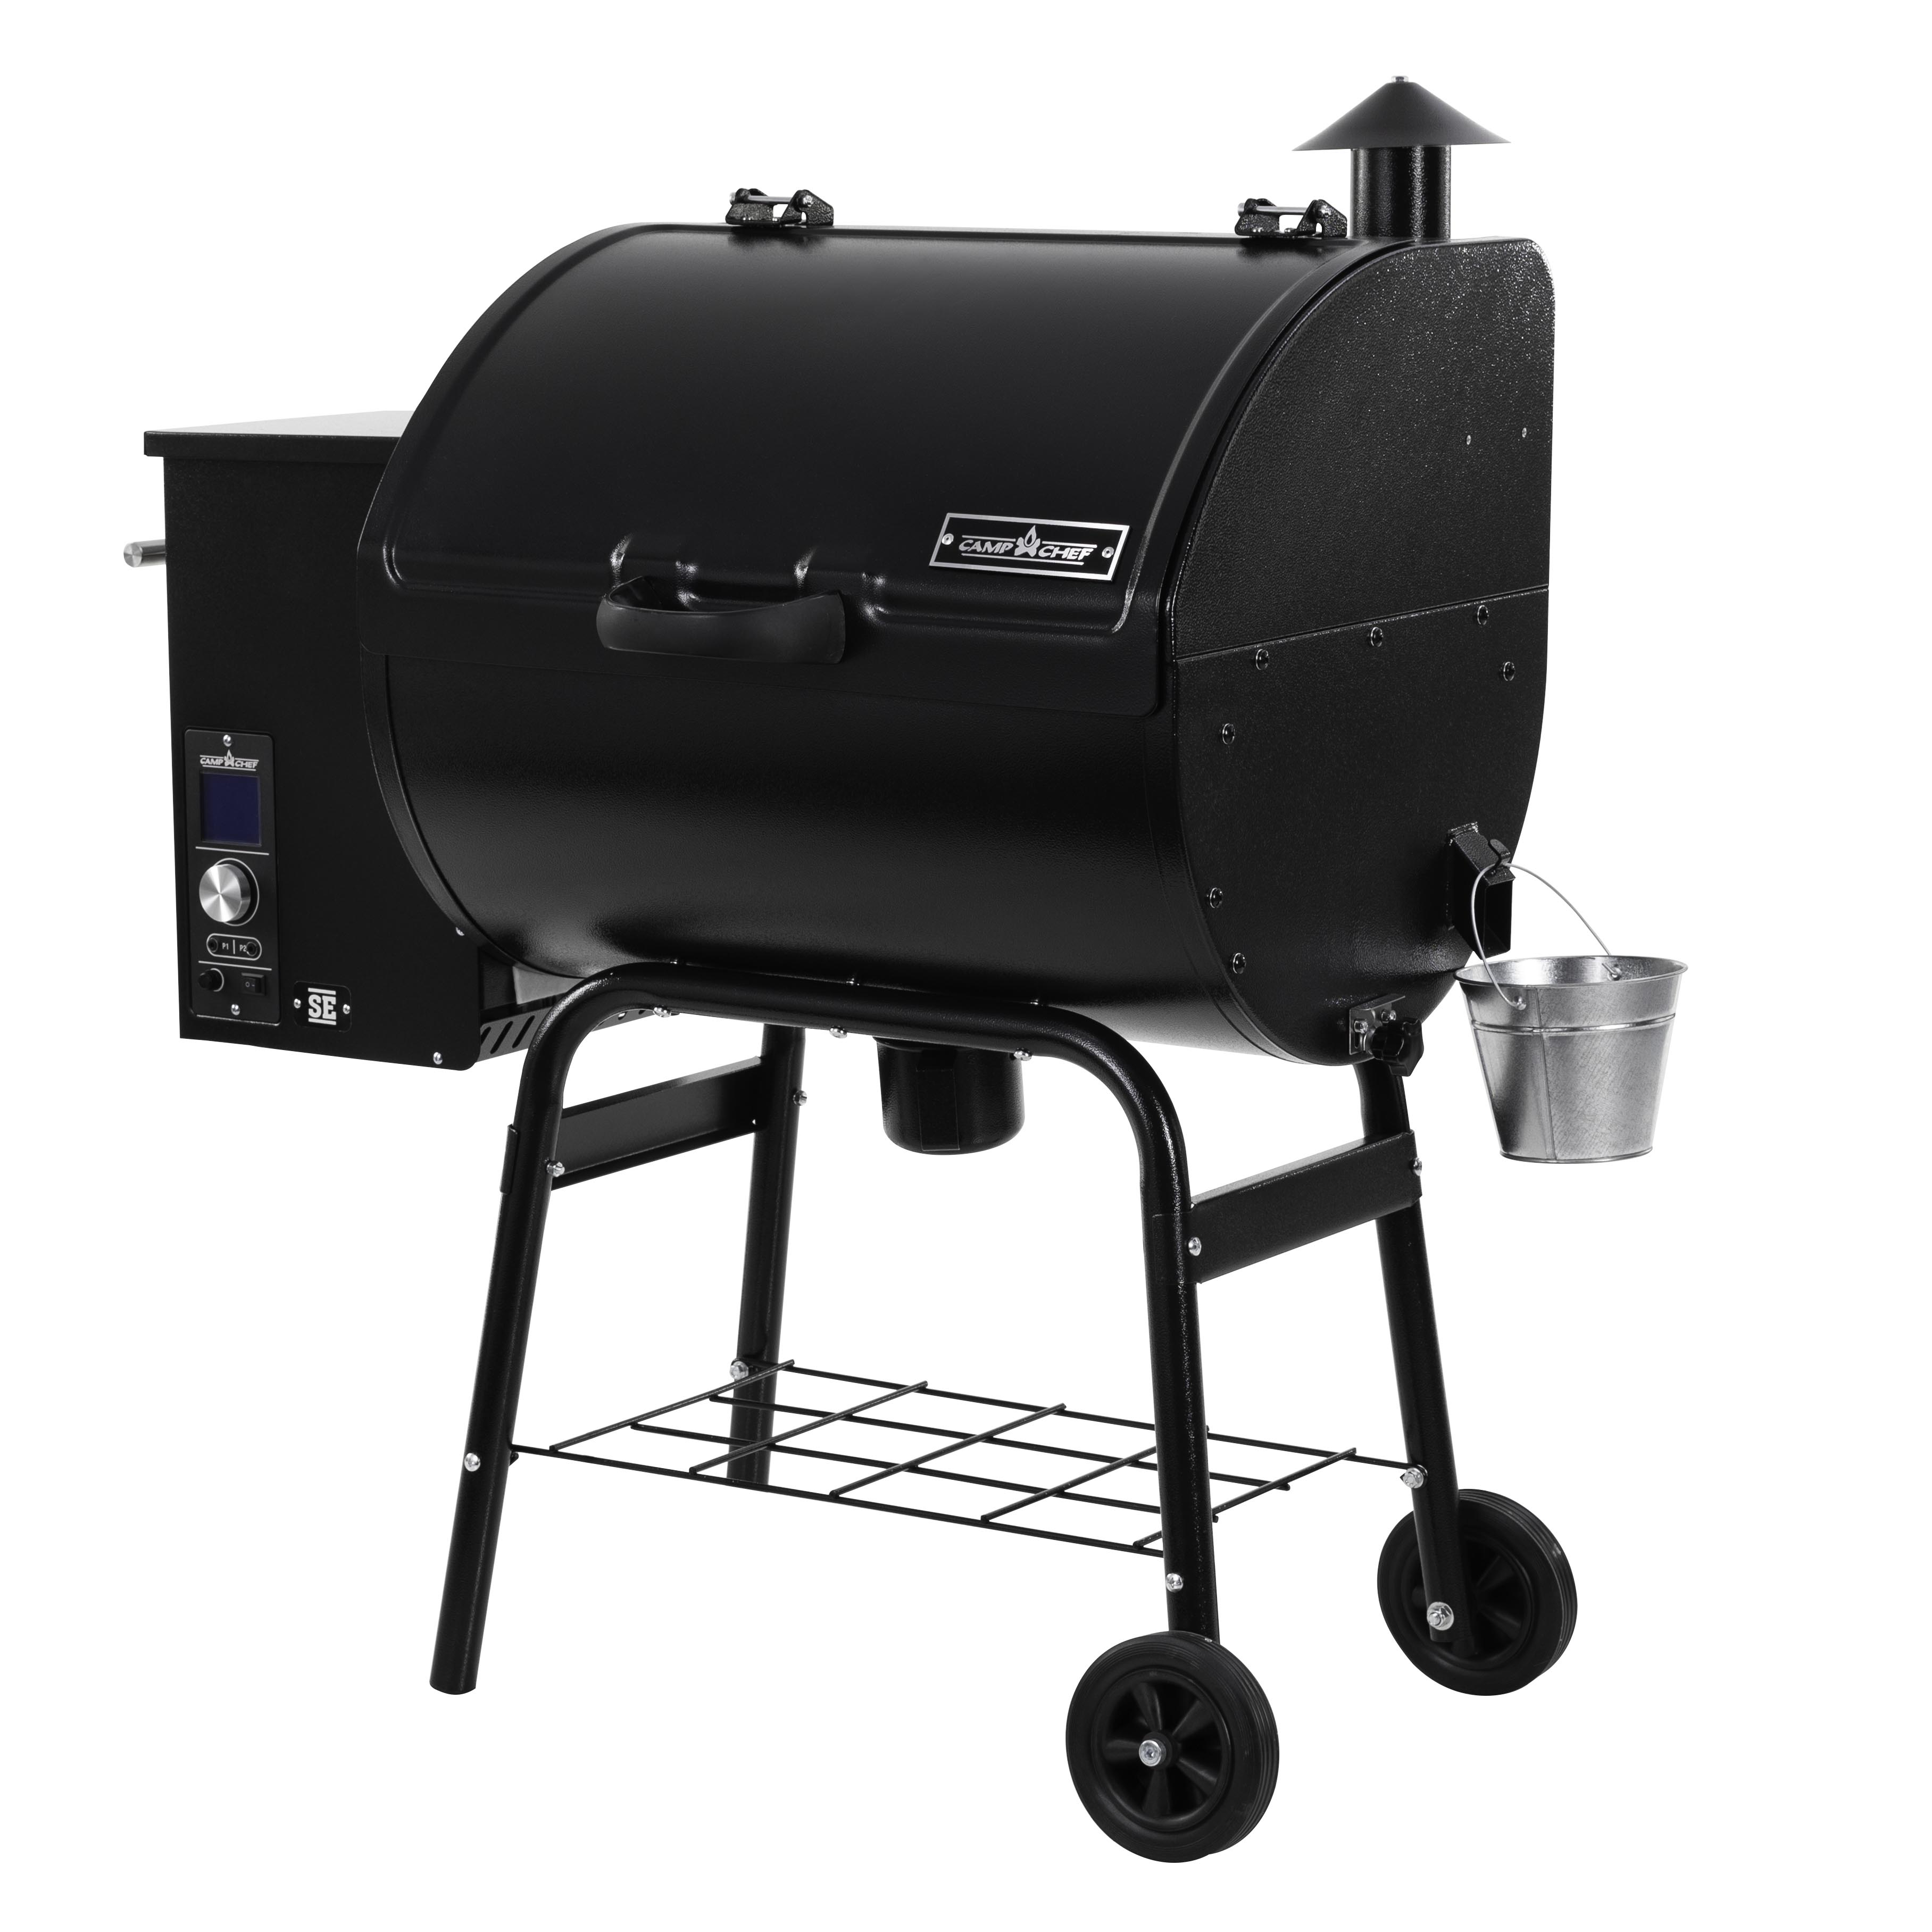 Camp Chef SmokePro SE Pellet Grill - image 1 of 8